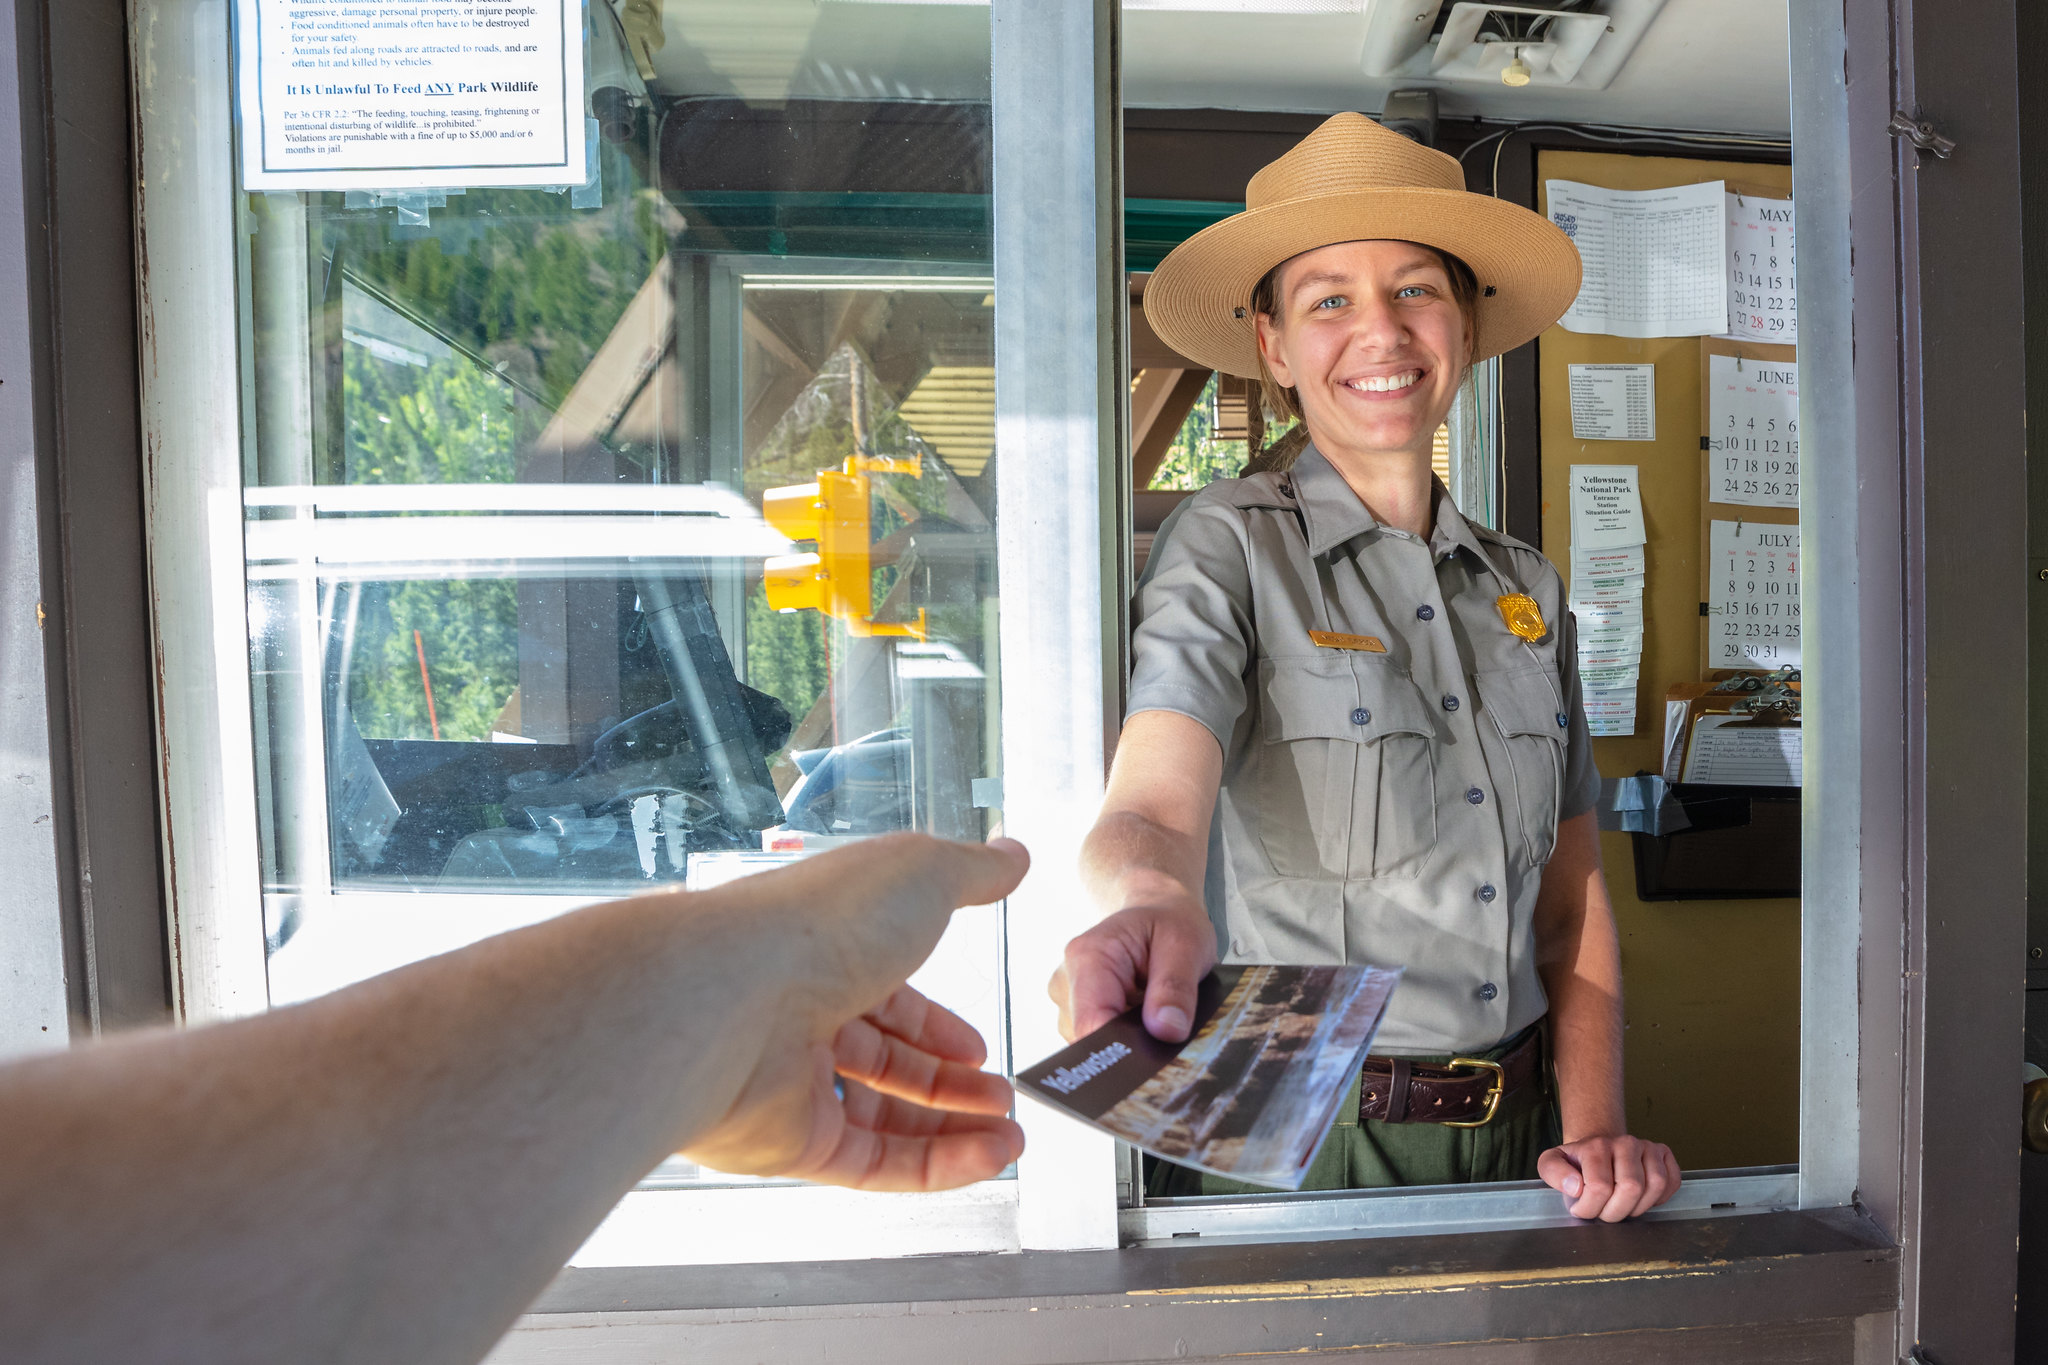 Ranger at East Entrance hands out a park map